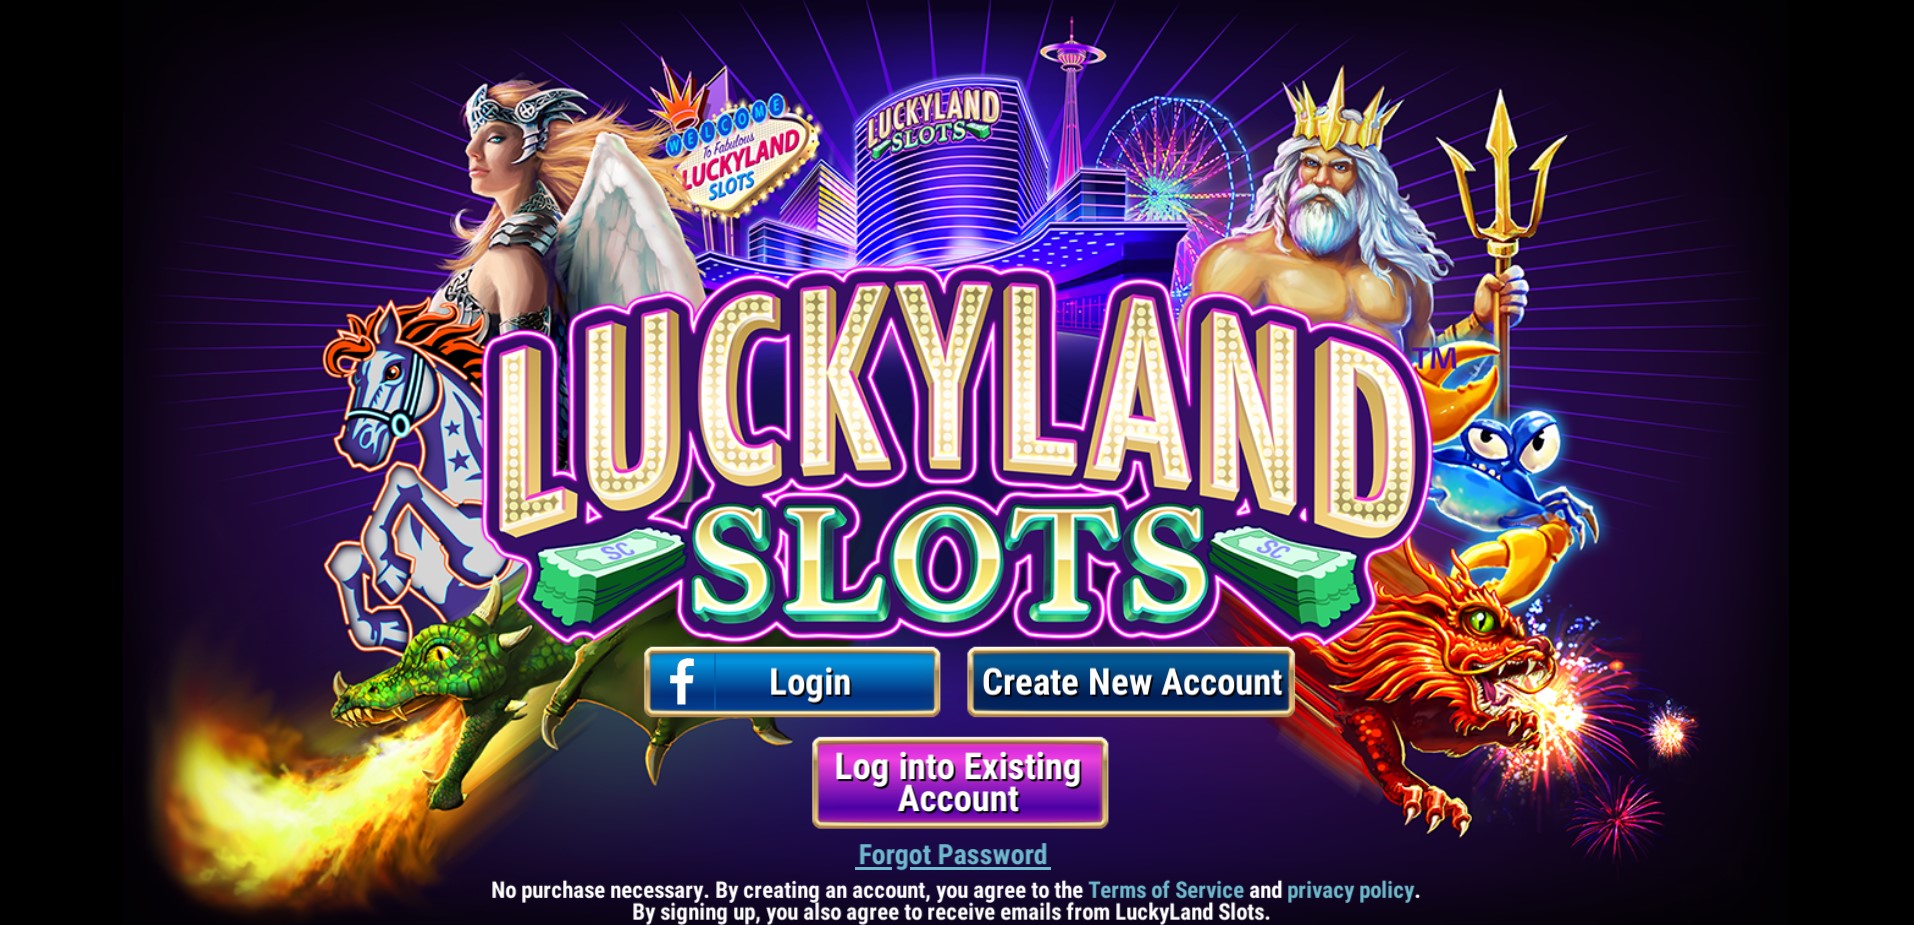 Overview of Lucky Land Slots Game